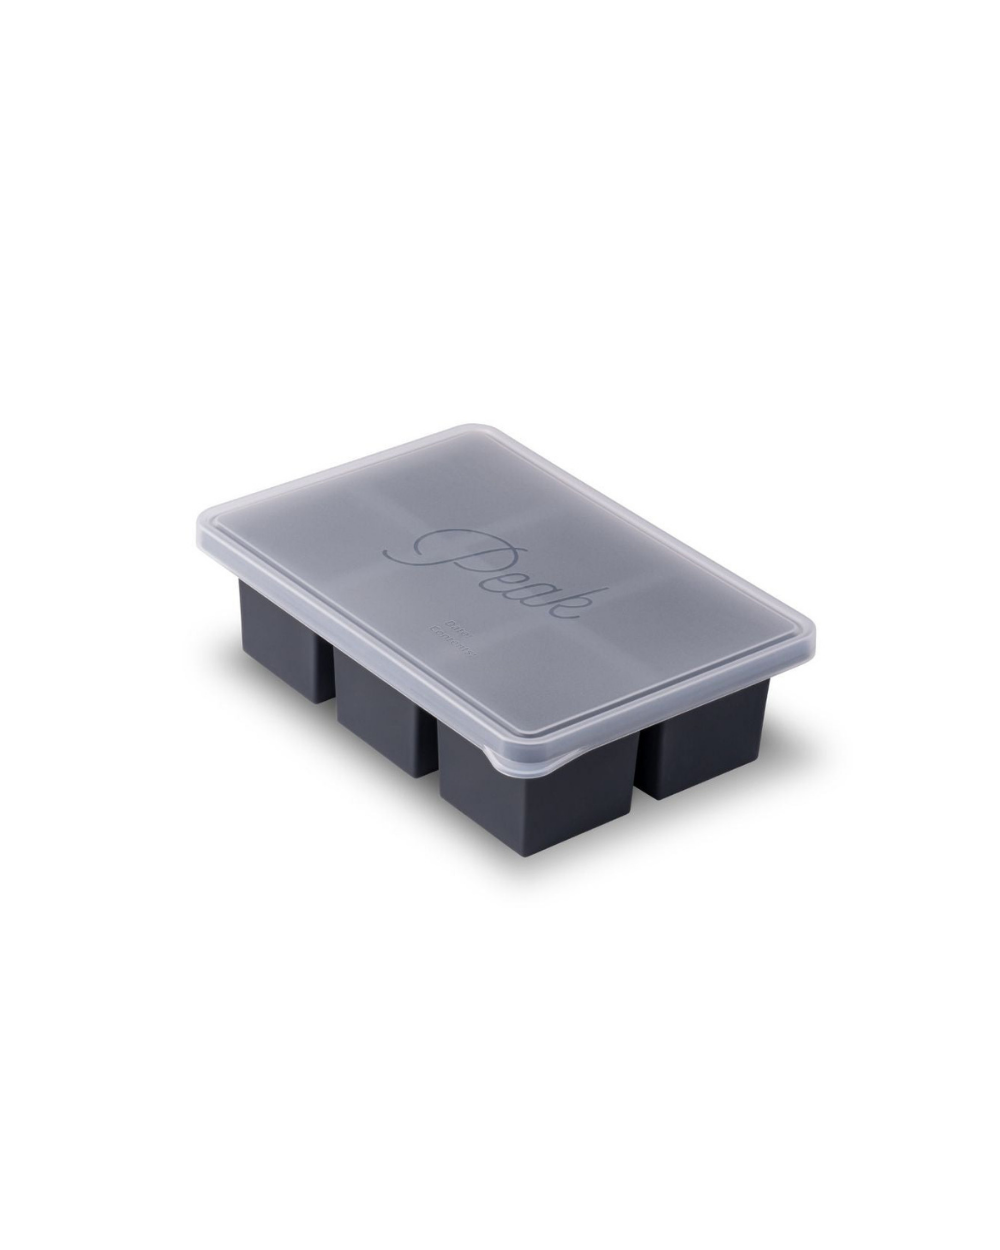 Silicone Freezer Tray for Soup, Stock, Chili, Leftovers and more